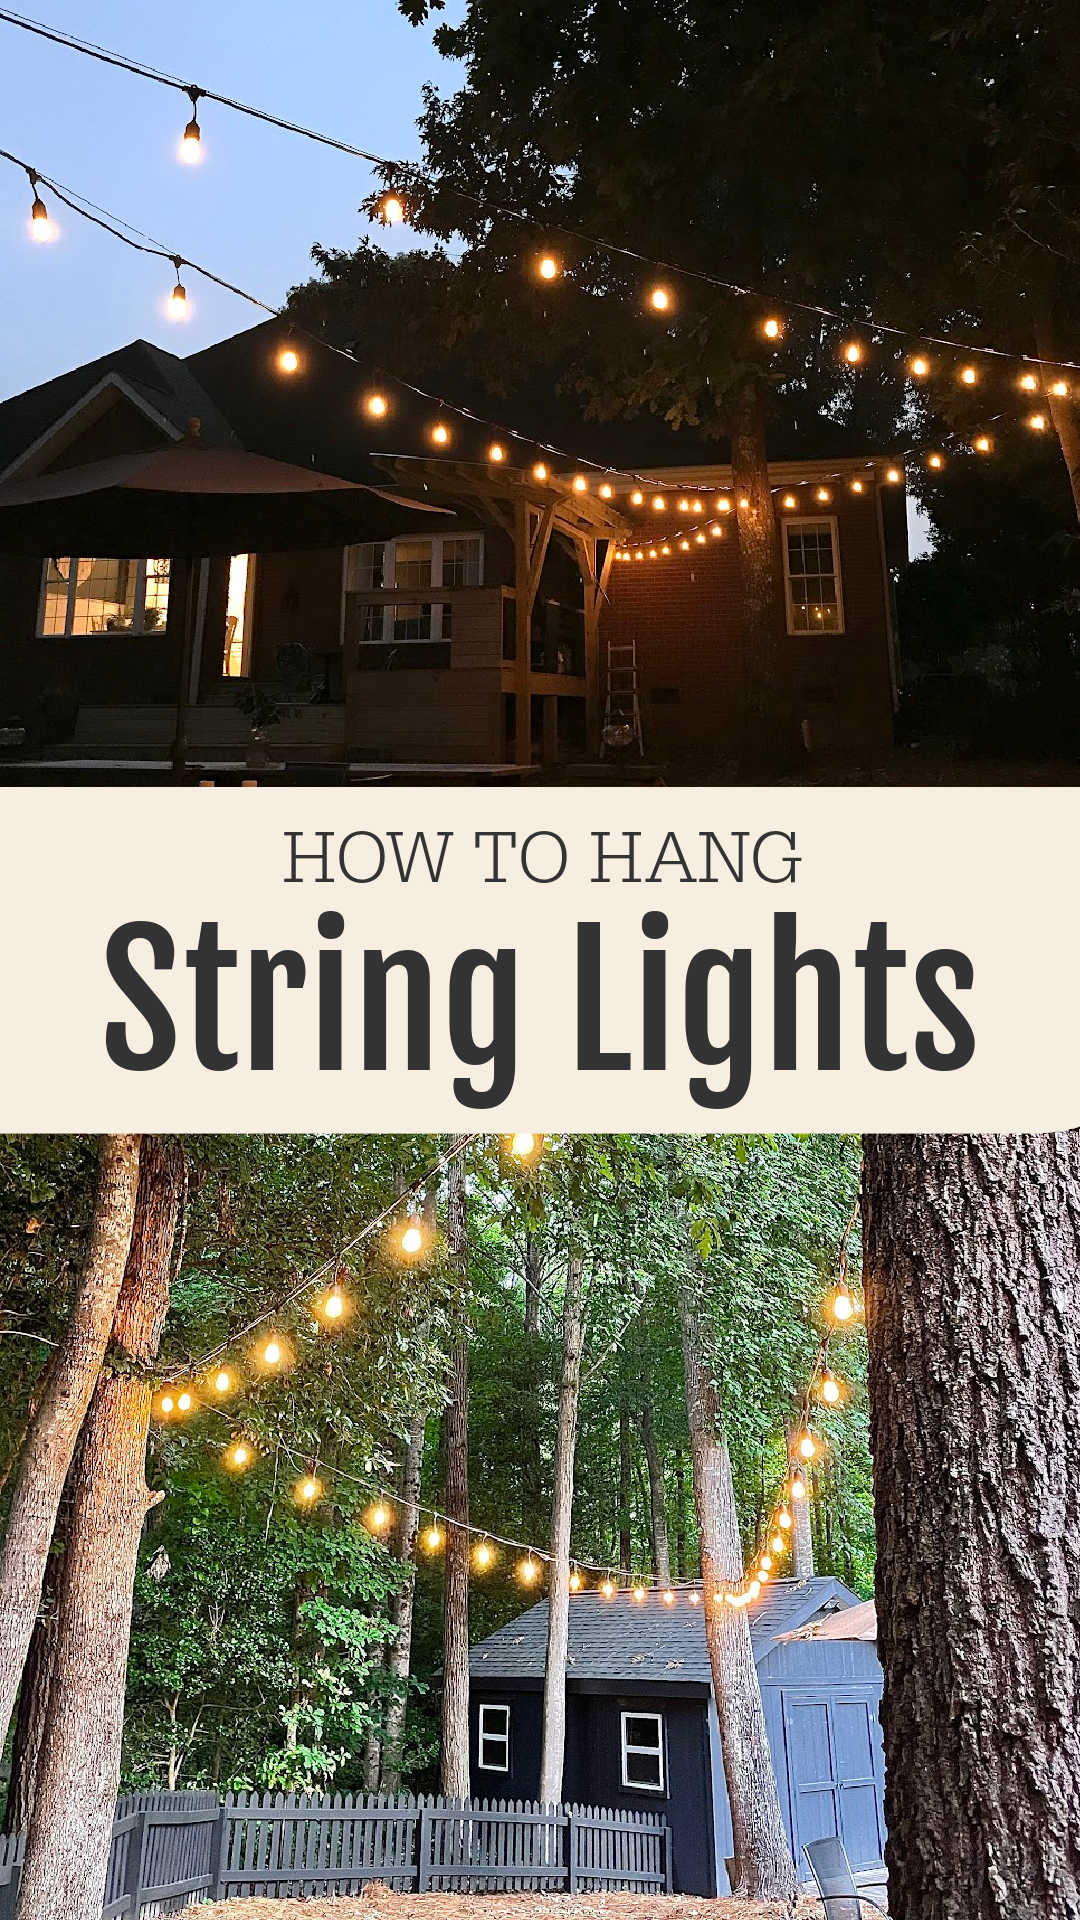 How to hang string lights to a tree